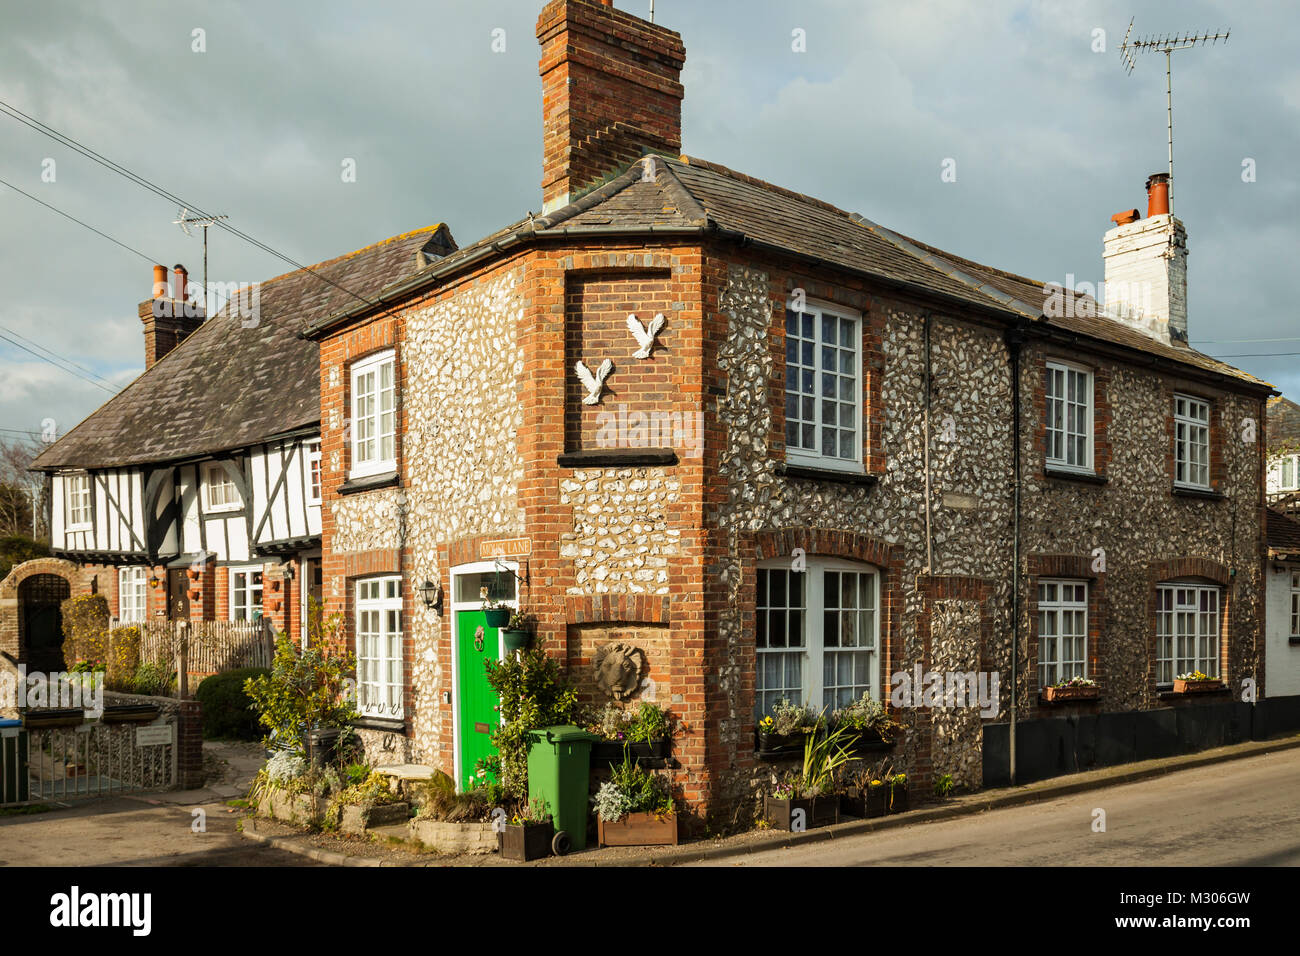 Cottage tradizionale in Steyning, West Sussex, in Inghilterra. Foto Stock